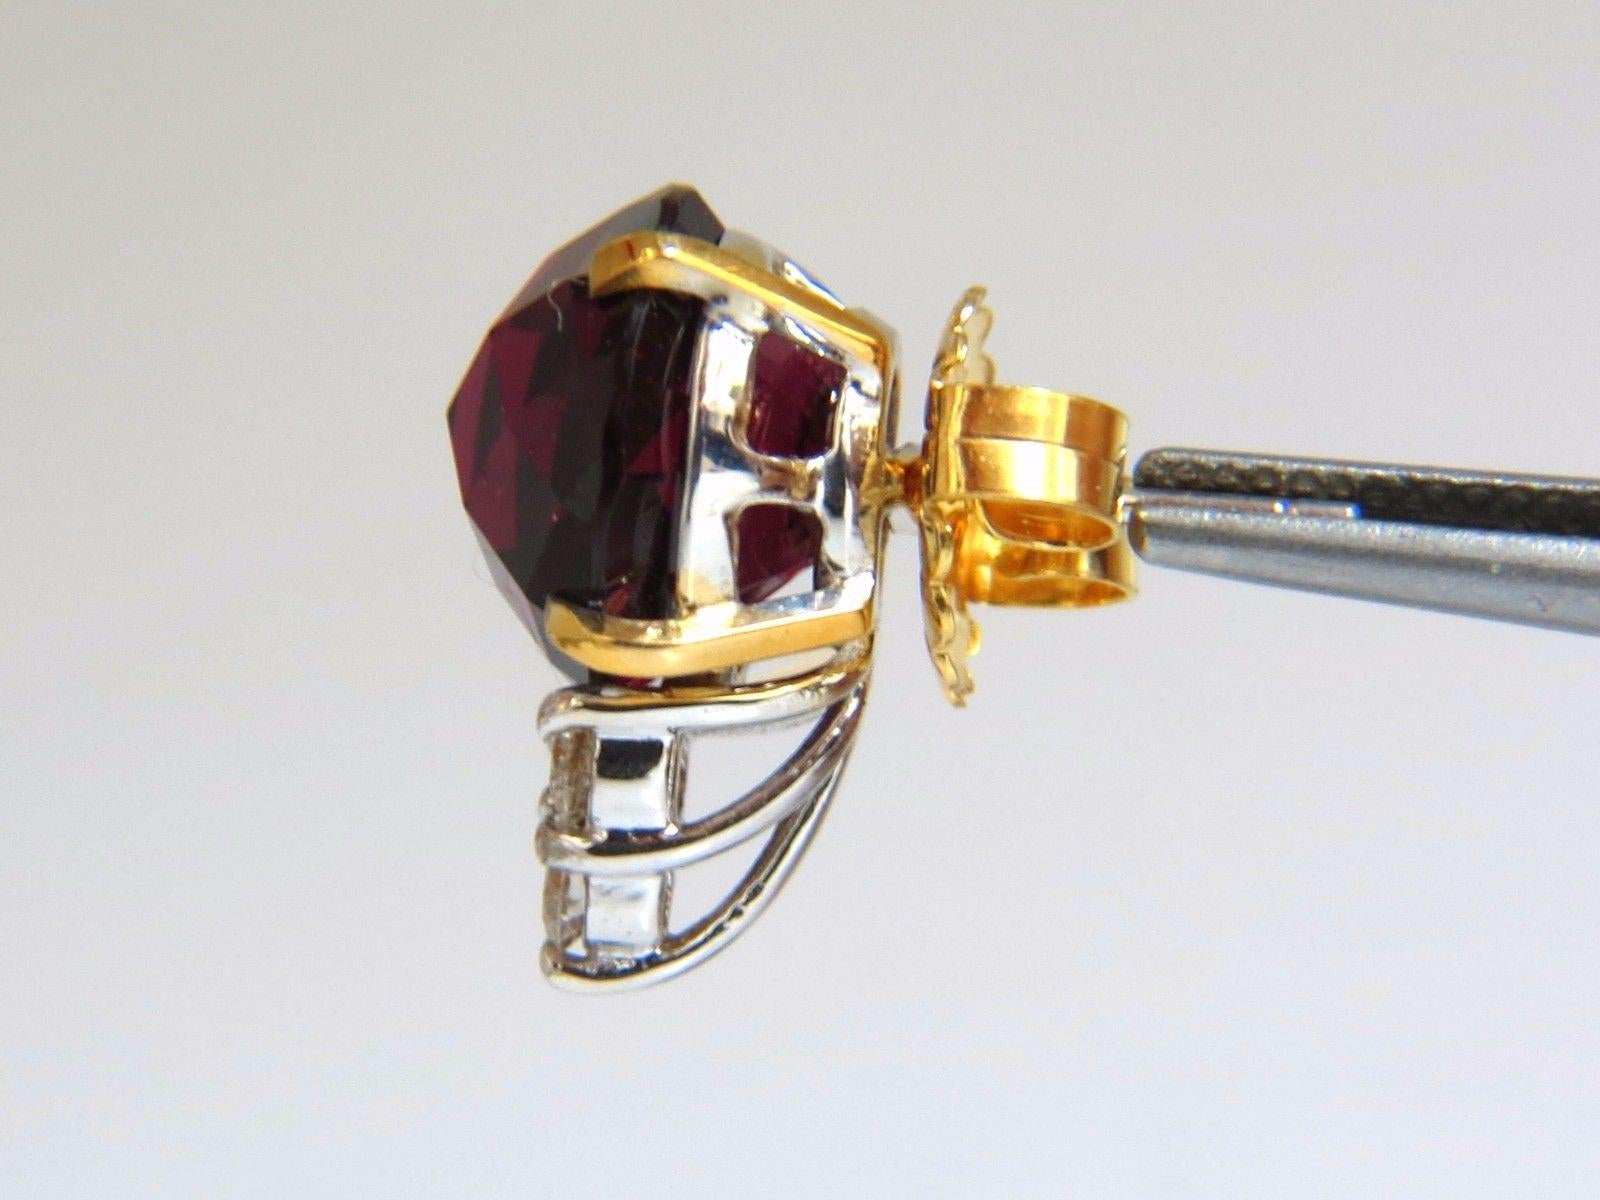 Victorian Revise.

19.76ct. Natural  Garnet earrings.

Rounds, rose cut:

11.9mm Diameter

 Transparent & clean clarity.

Bright shines of  vivid red flash.

.57cts of round diamonds: 

G-color, Vs-2 clarity.

14kt. yellow gold

8.8 grams.

Earrings